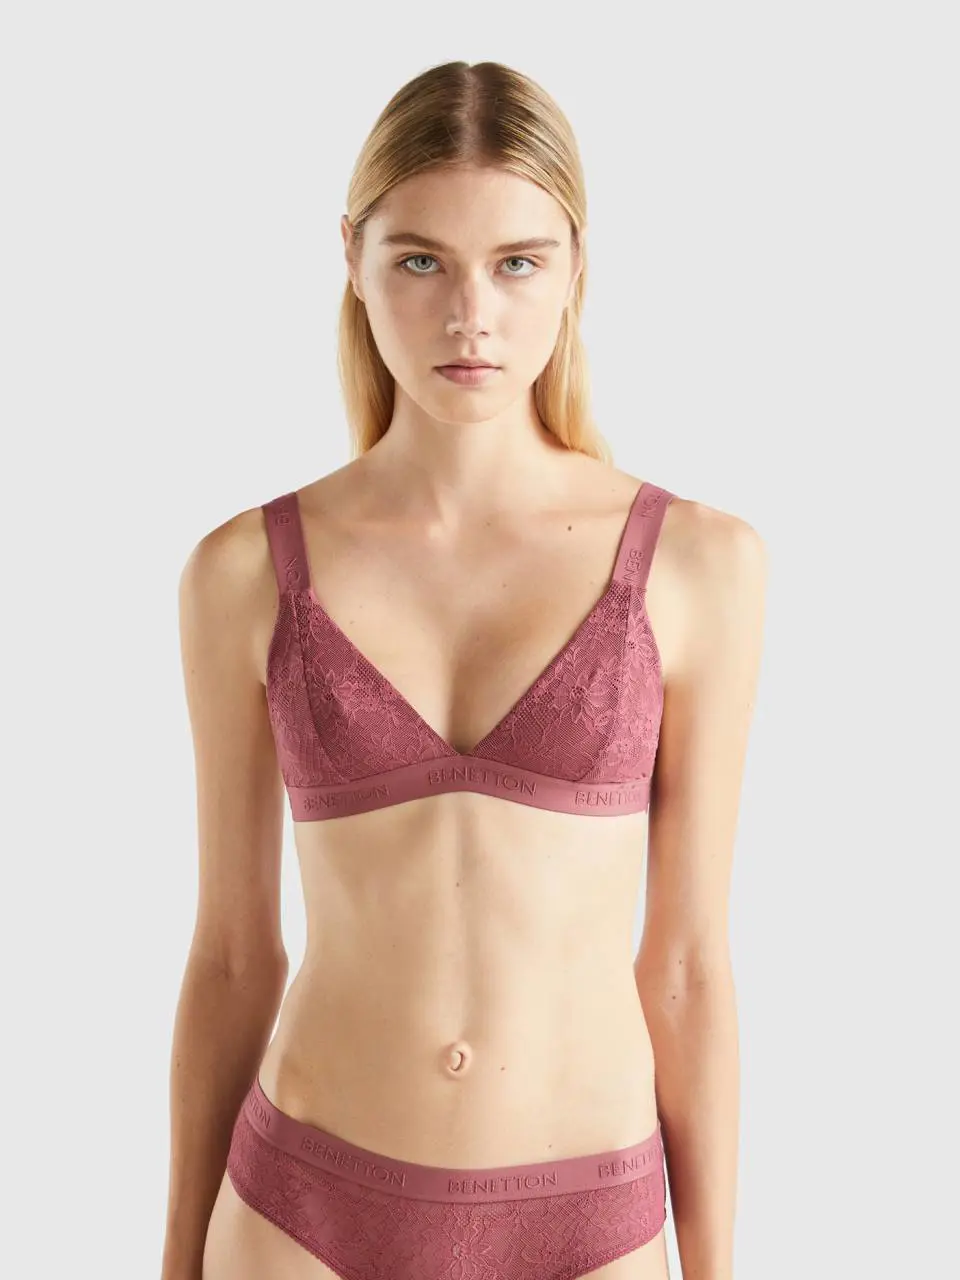 Benetton triangle bra with lace. 1